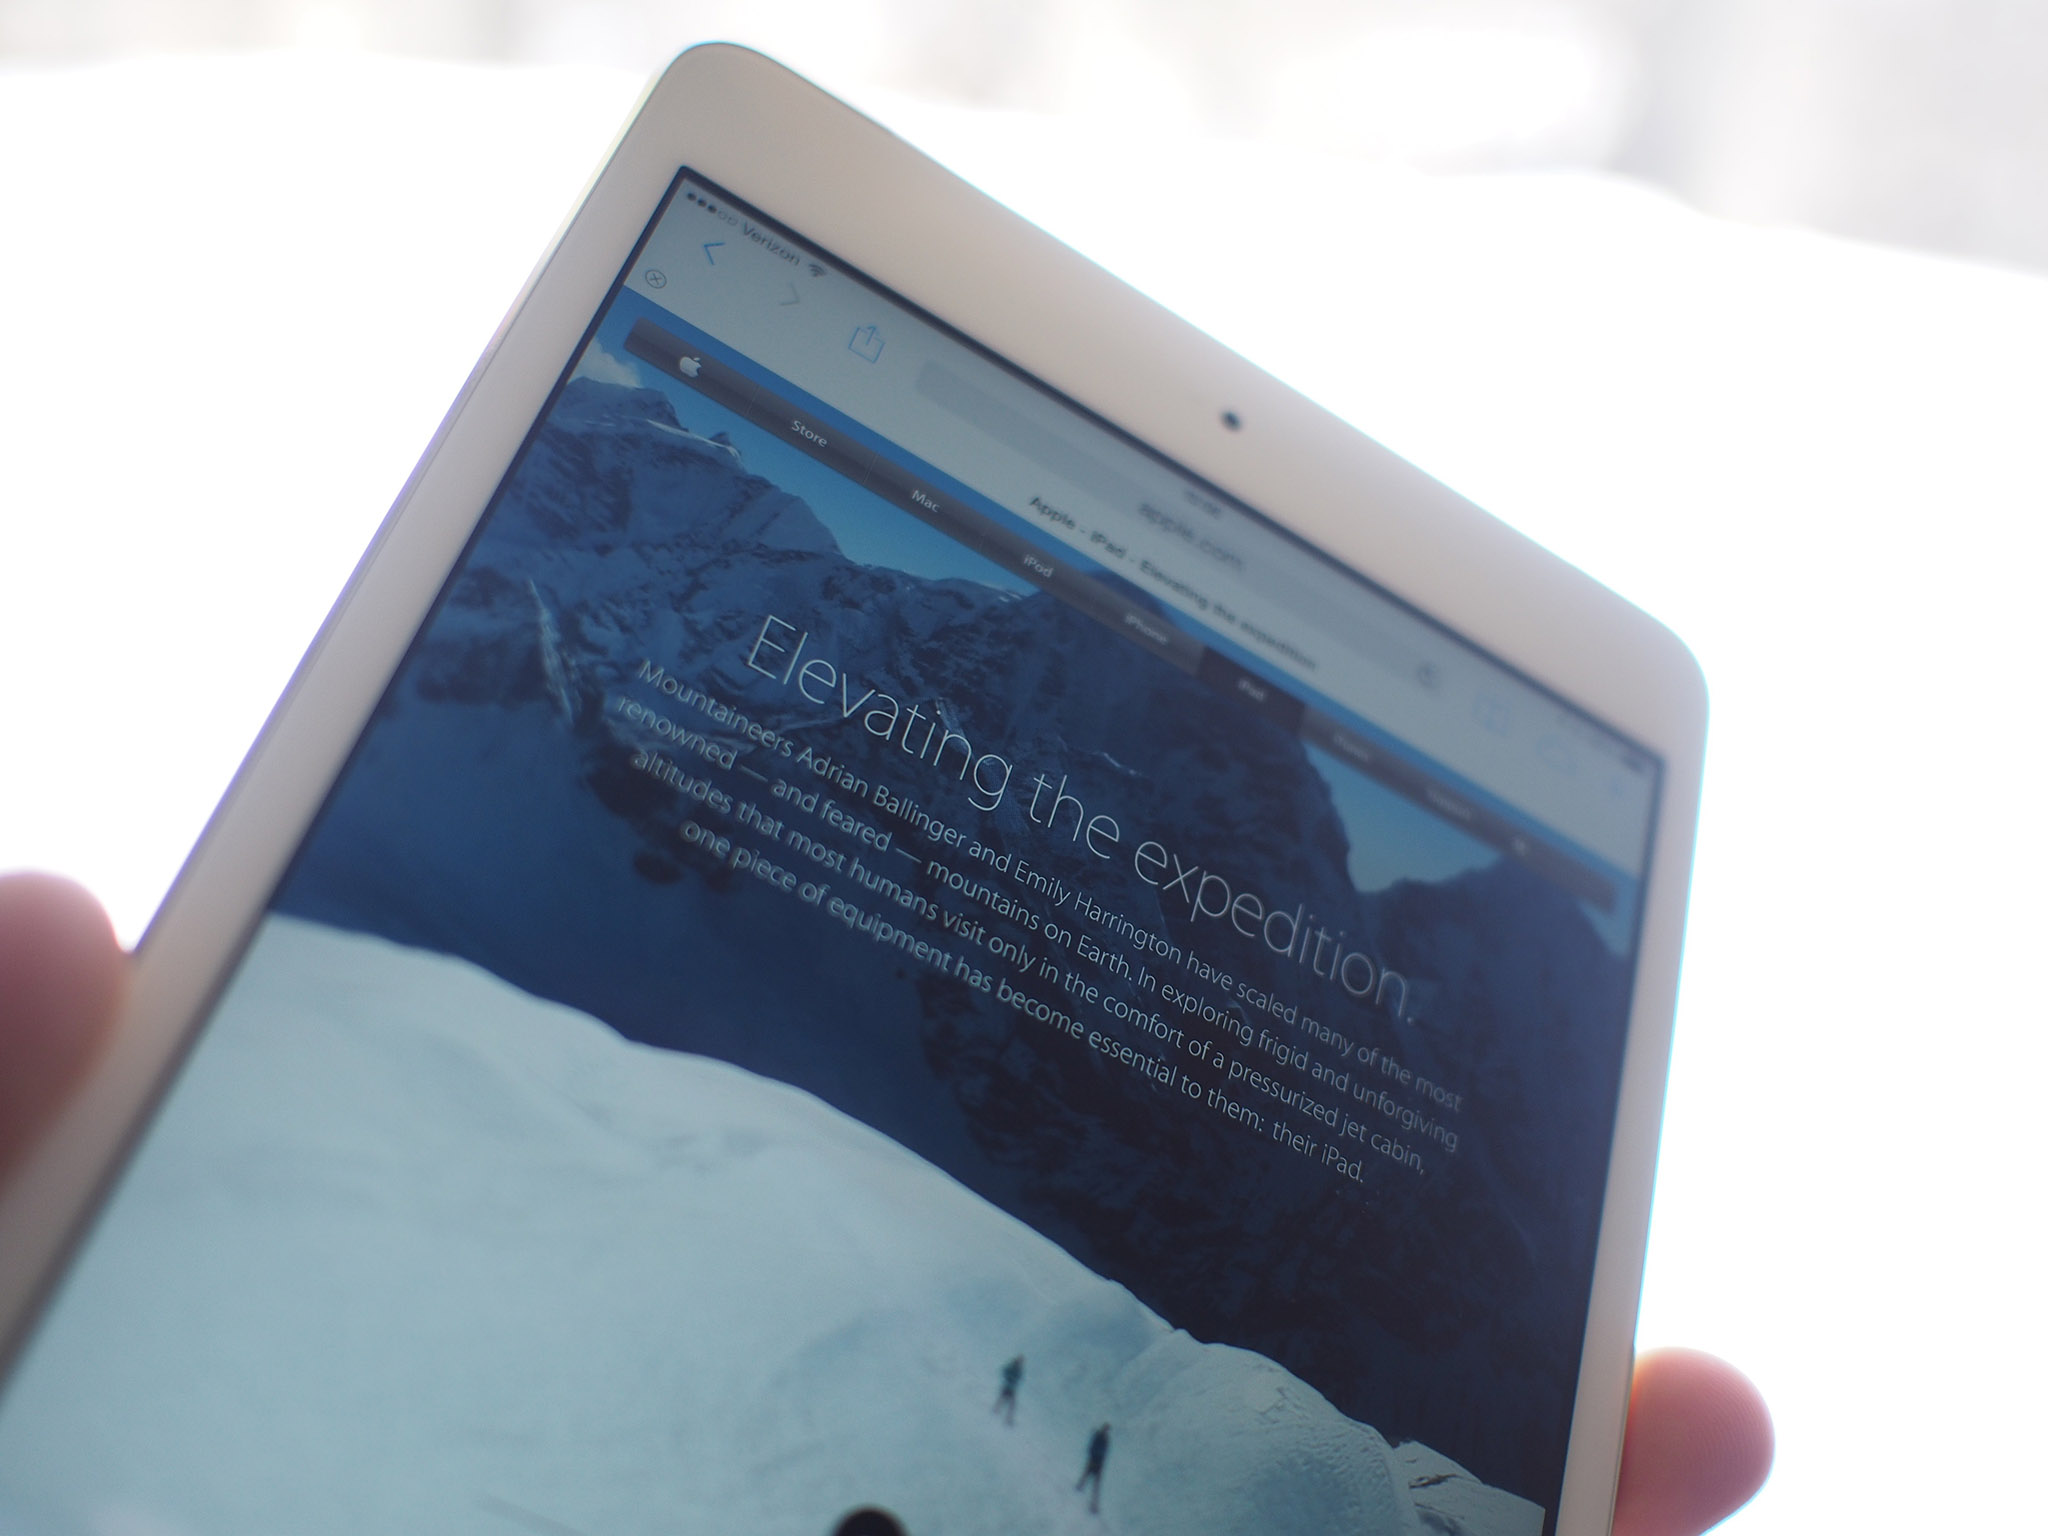 Apple takes the iPad to a new summit